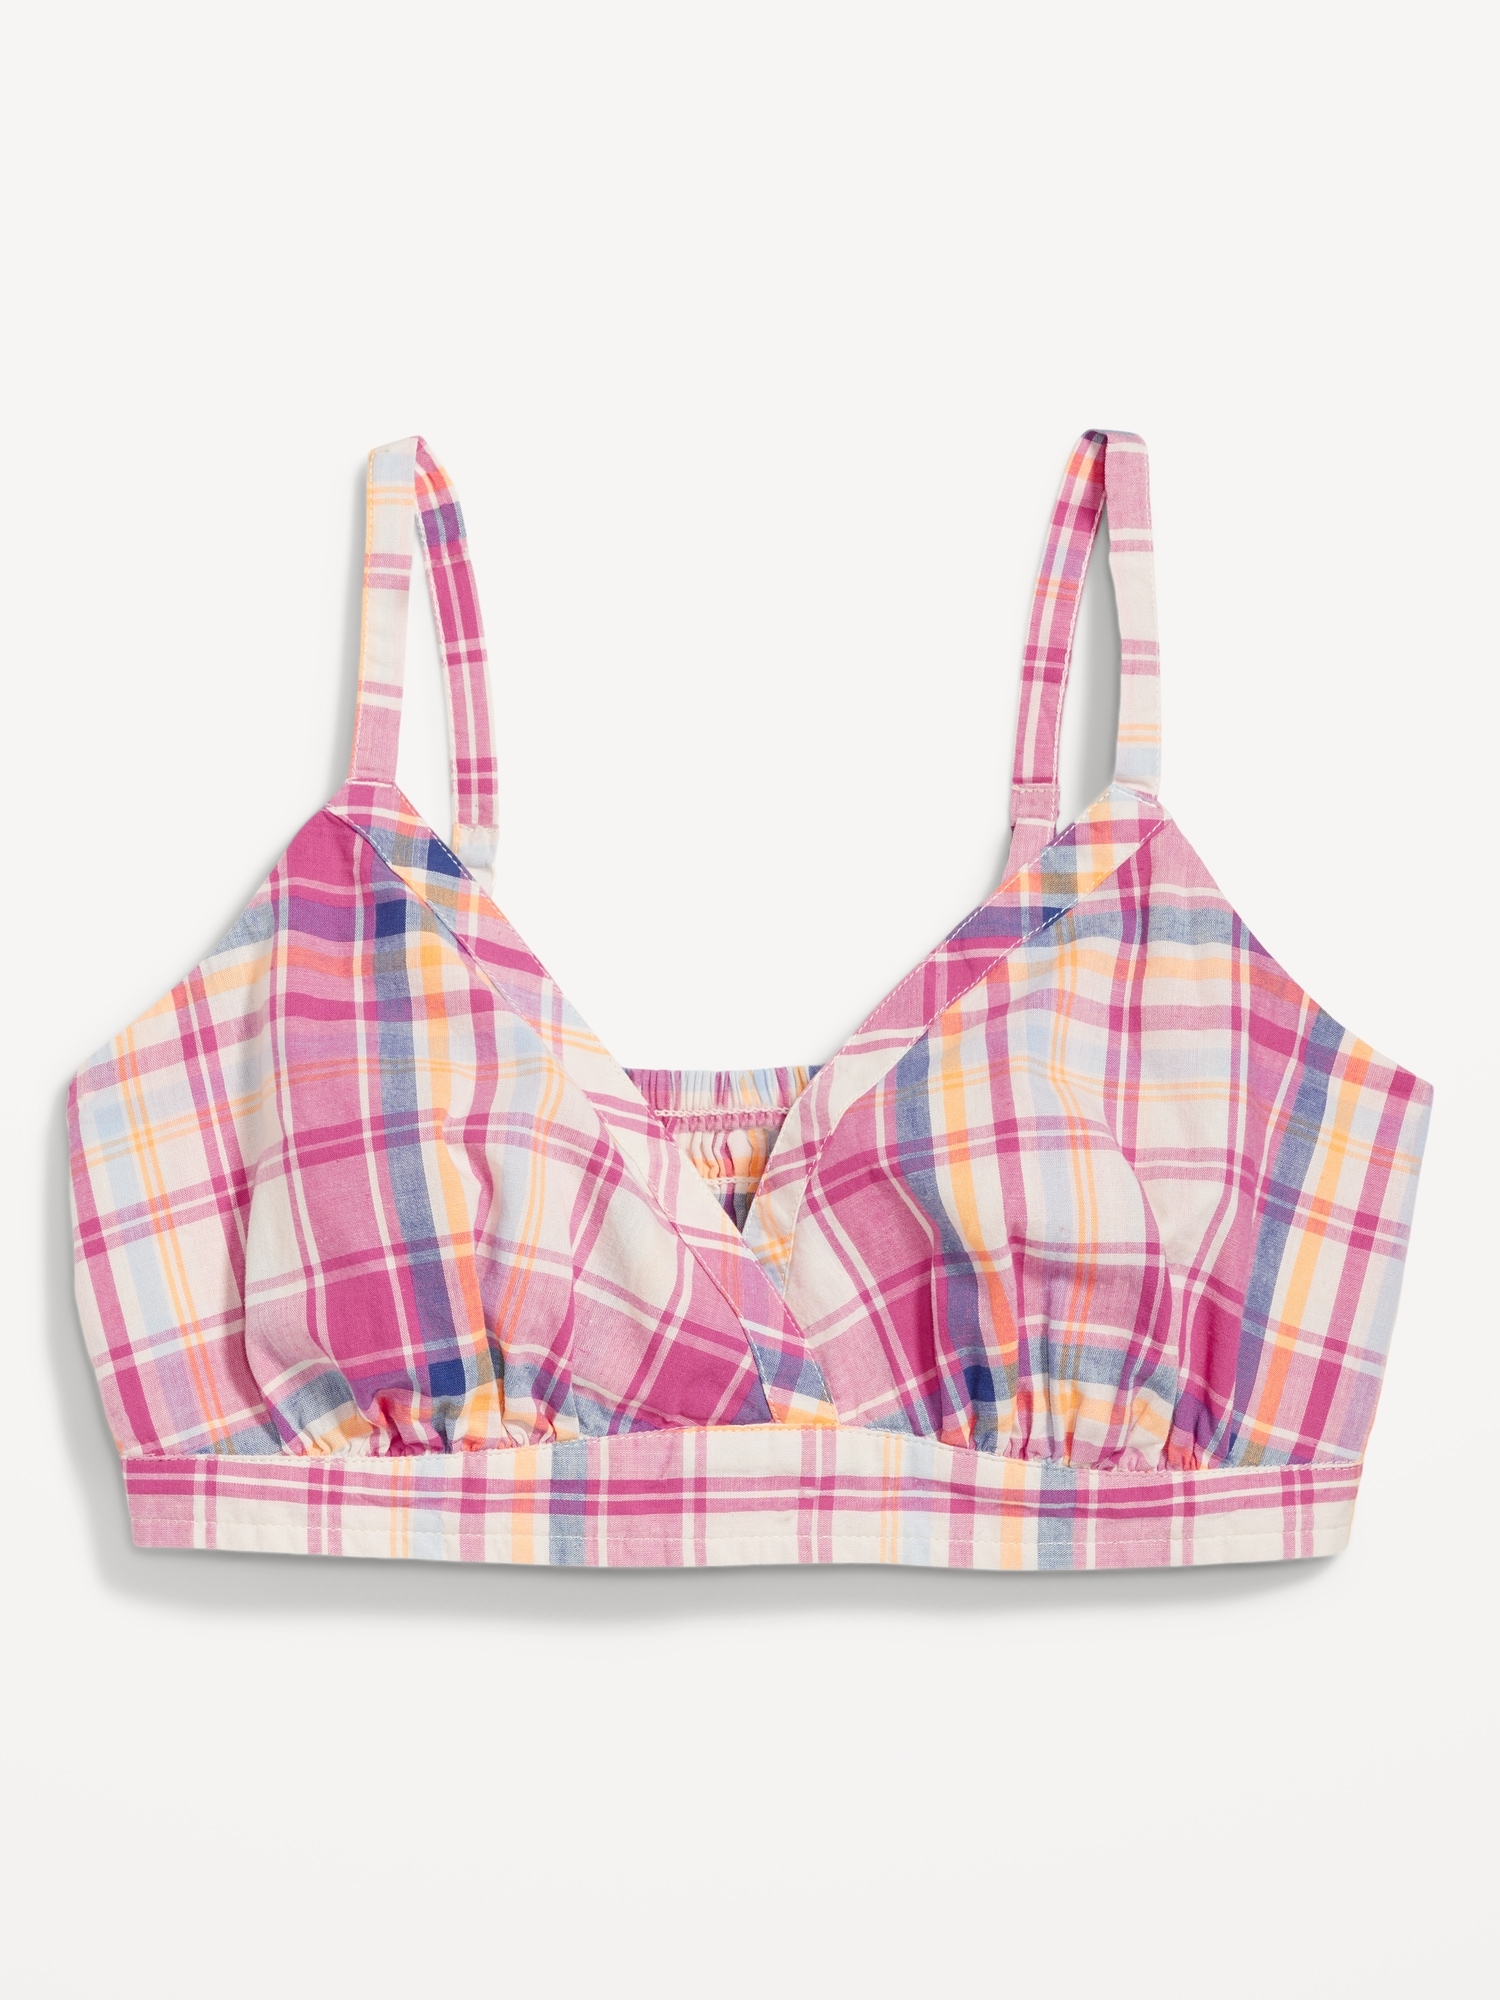 PINK Plaid Sports Bras for Women